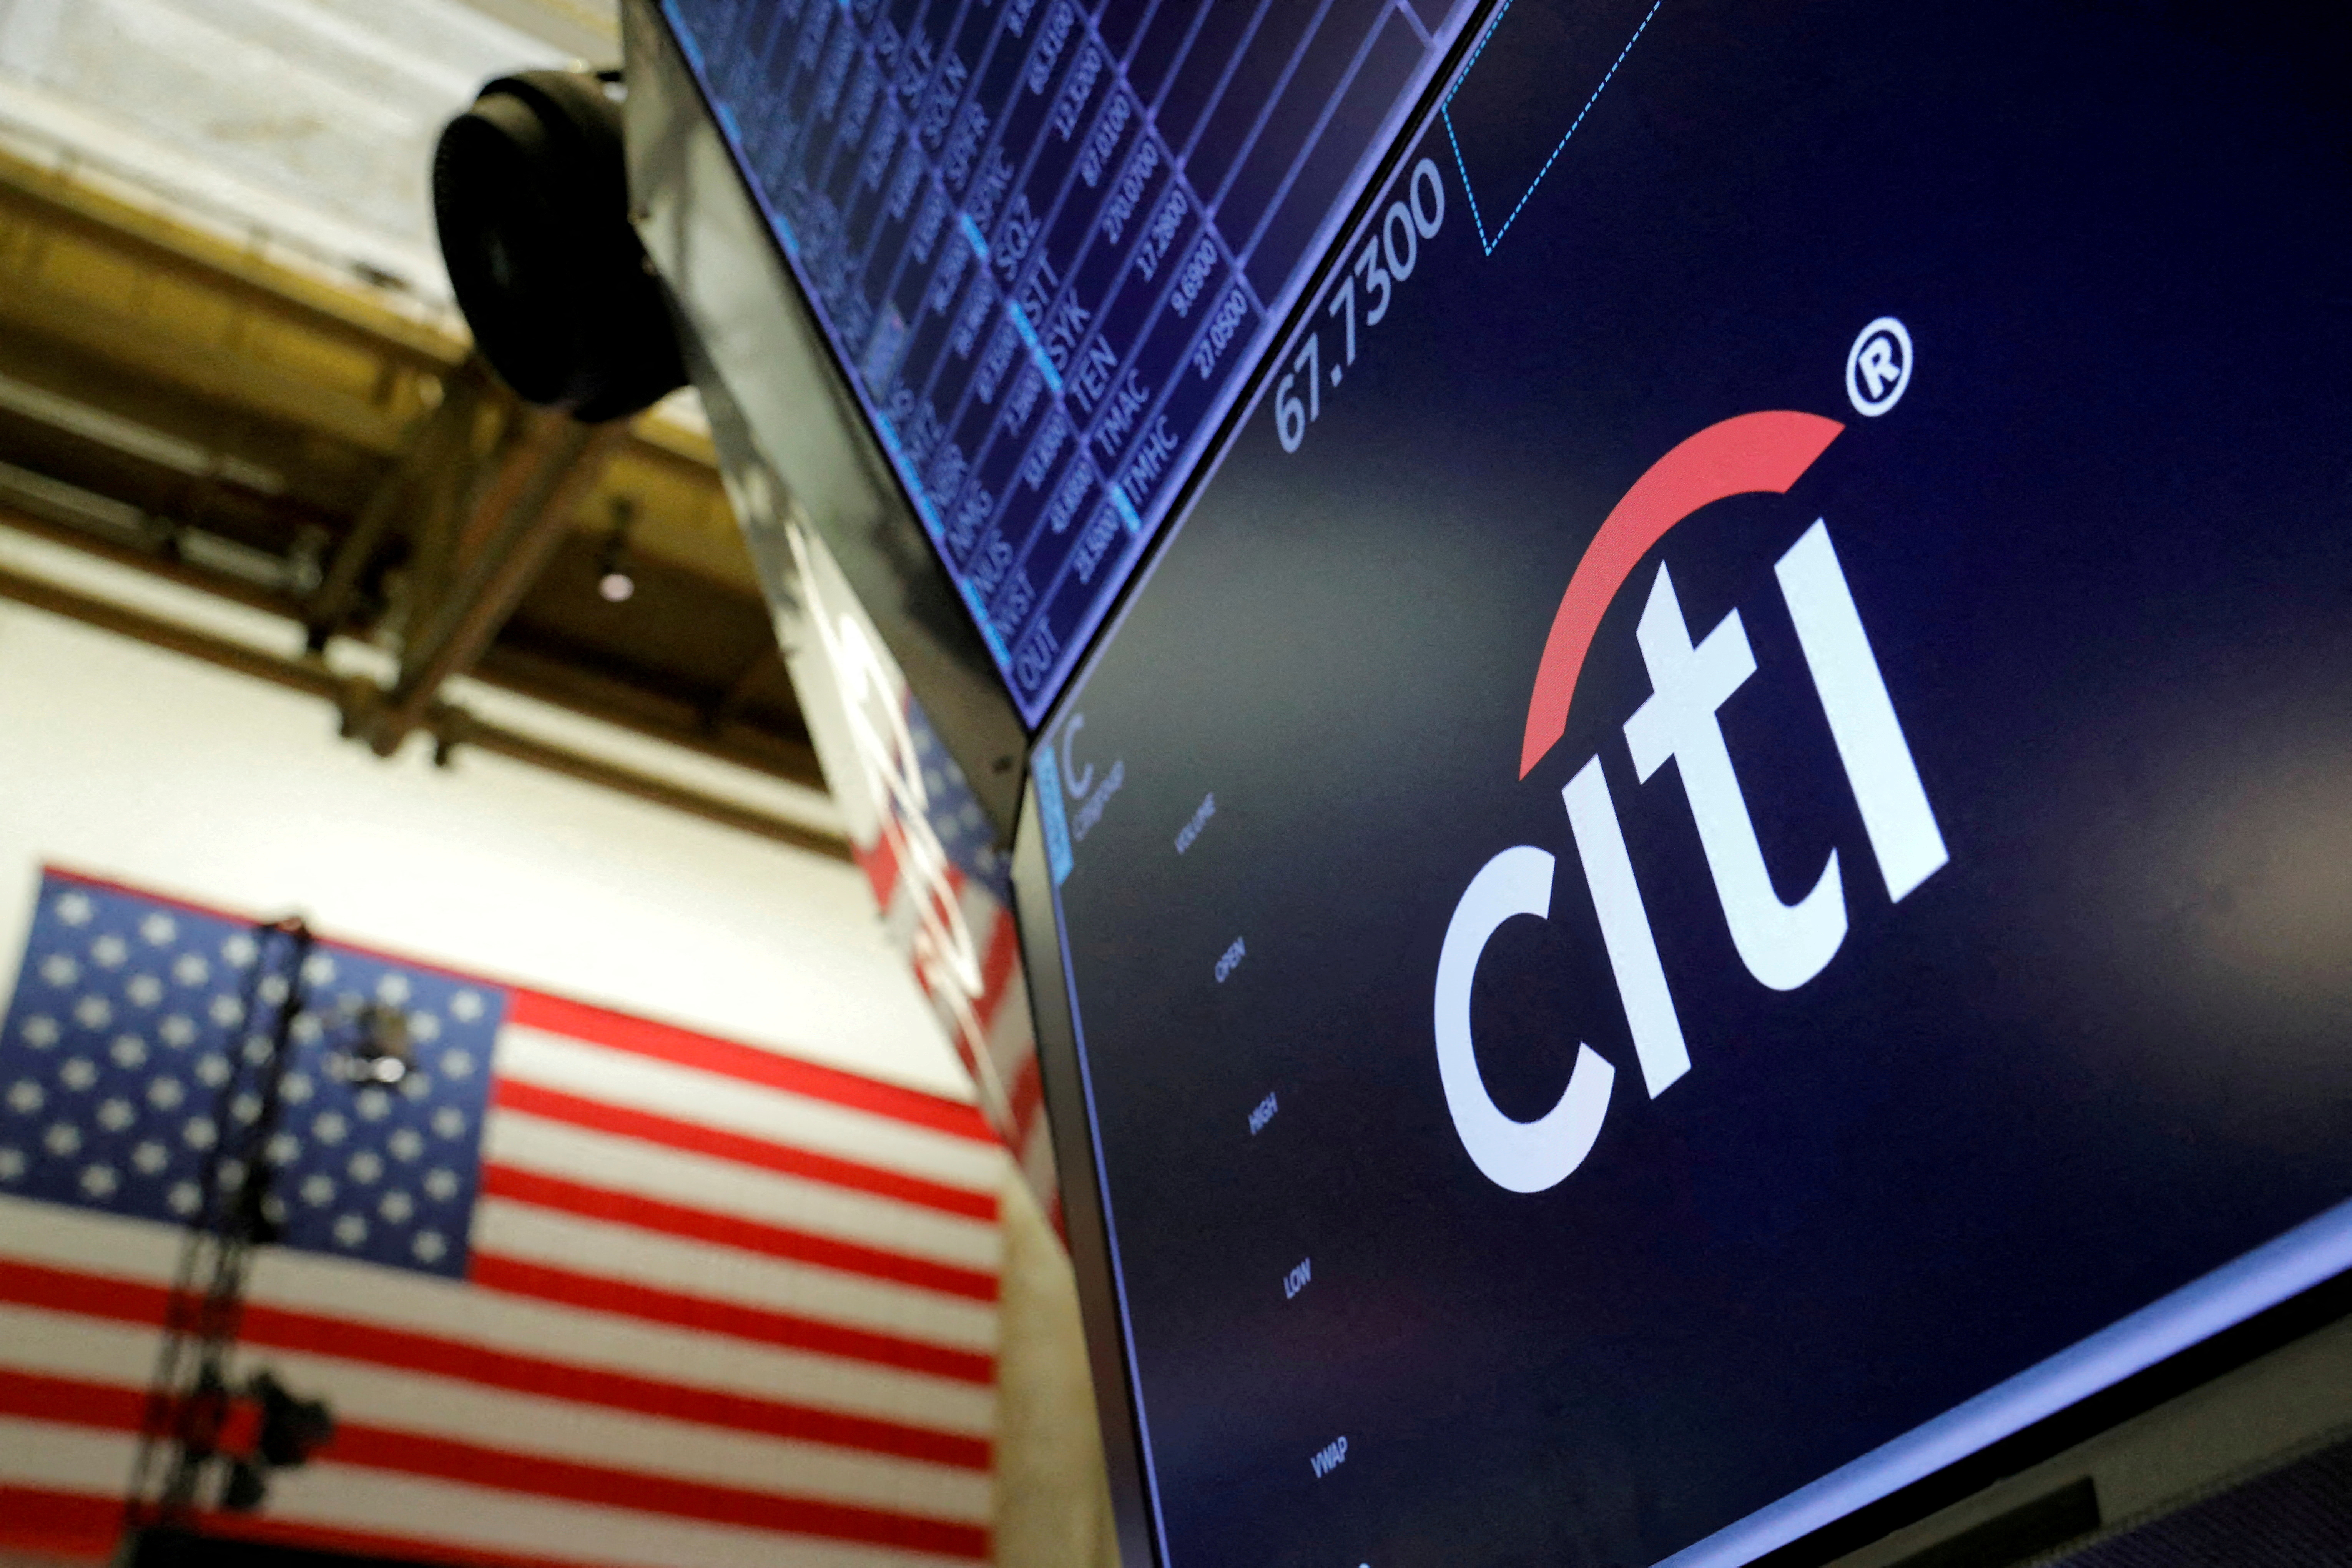 The logo of Citibank is seen on the trading floor of the New York Stock Exchange (NYSE) in Manhattan, New York City